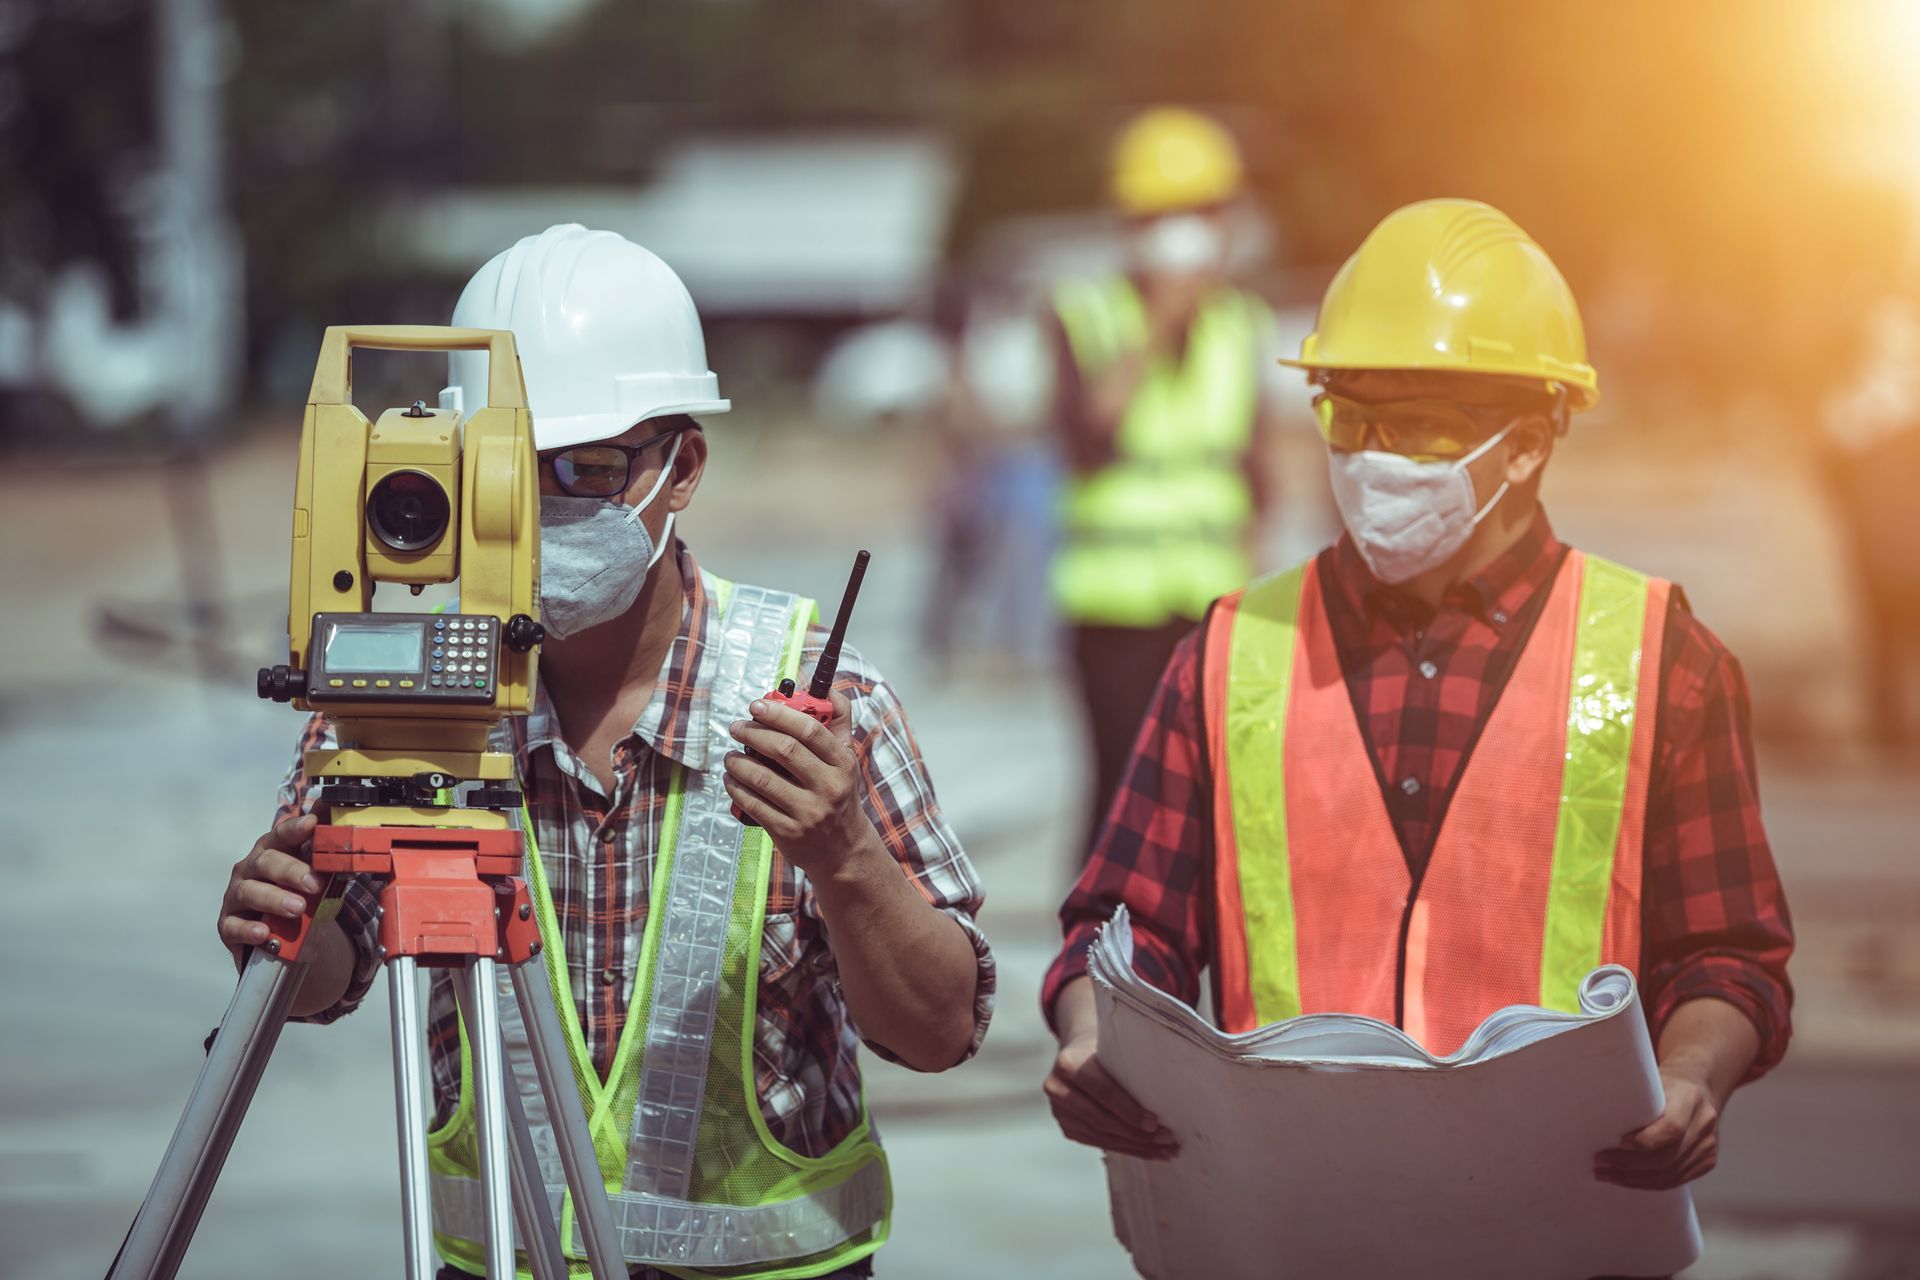 ensure protective equipment is provided among workers